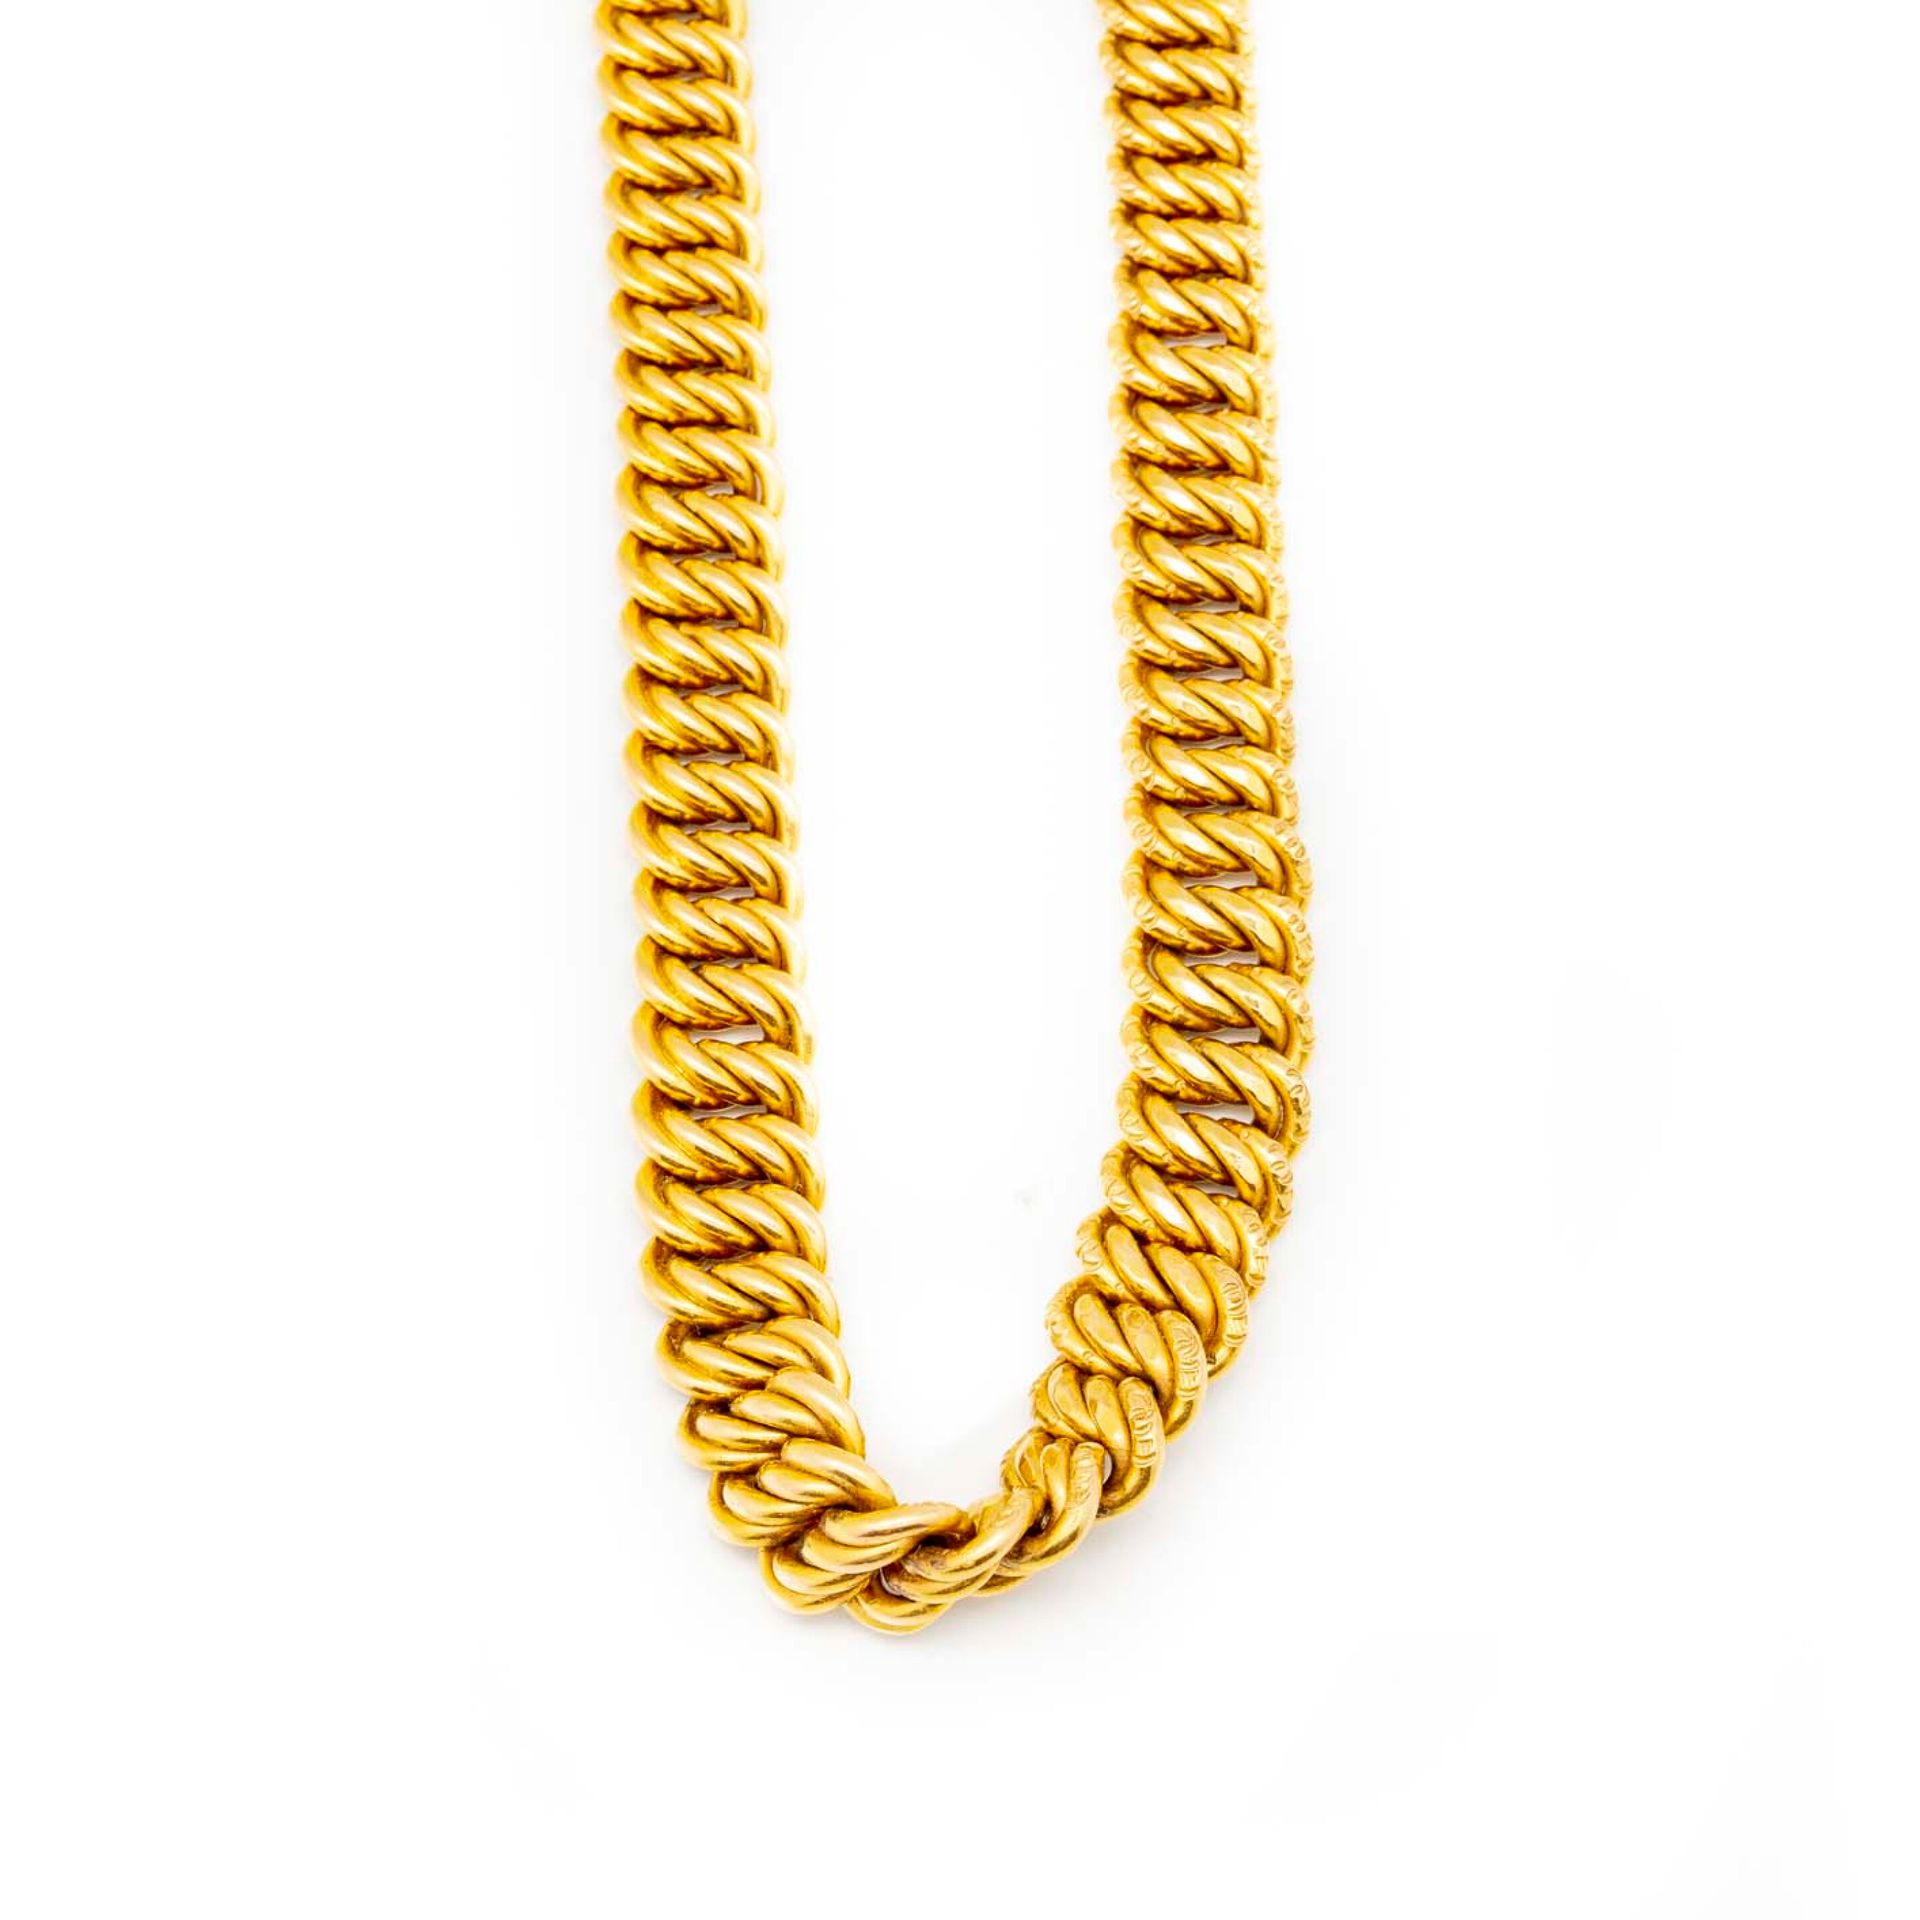 Null Yellow gold necklace with flexible articulated links

Weight : 117 g.